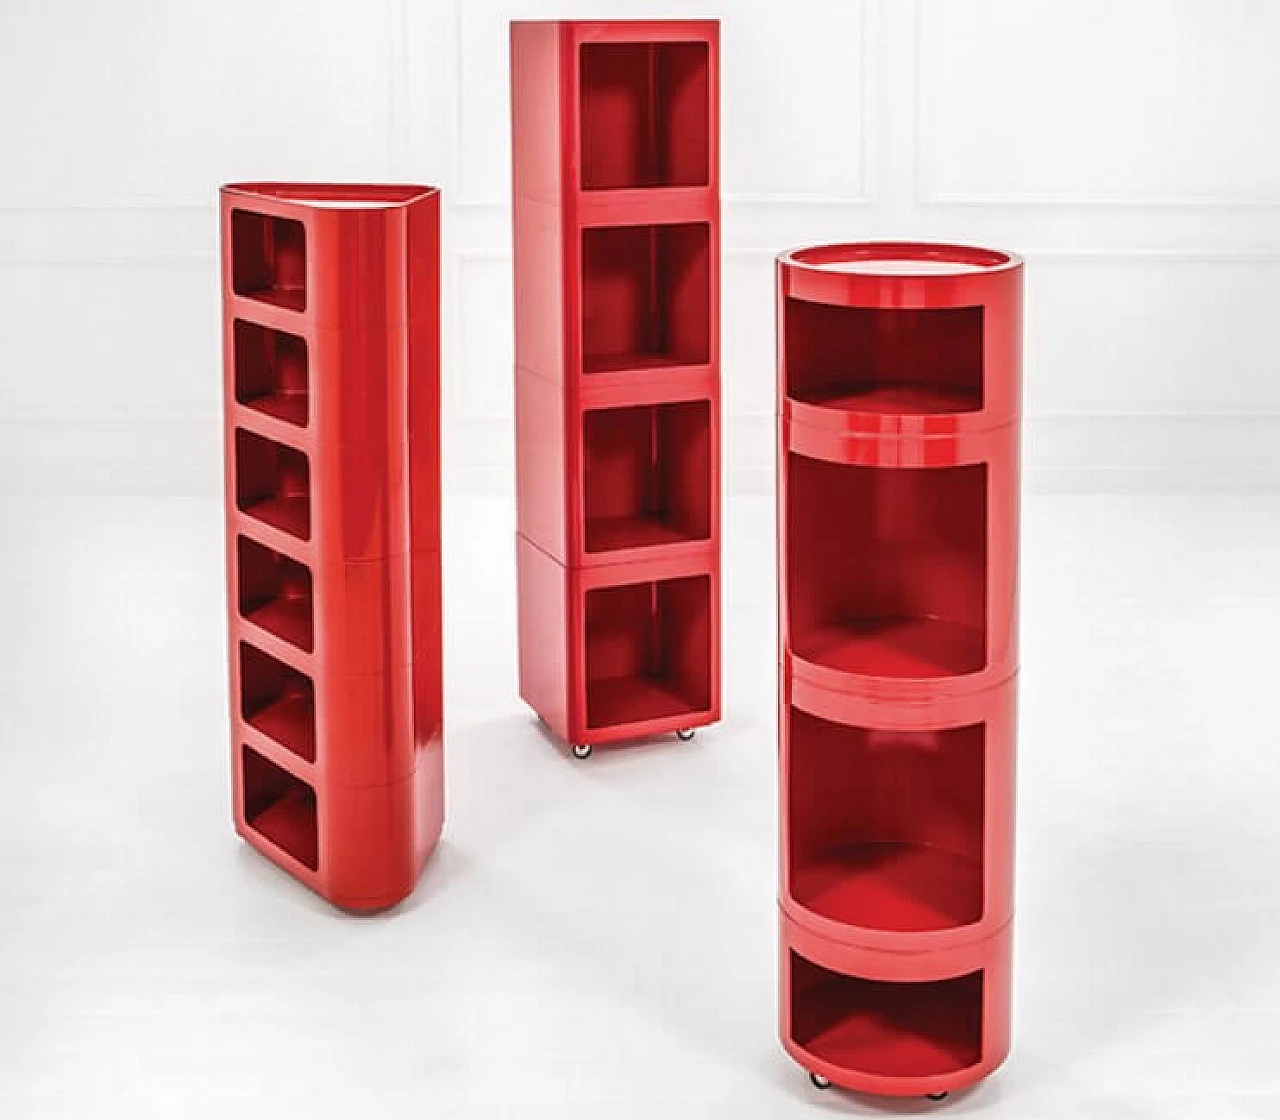 Valletto trinagular stackable shelves by G. Brusa for Valenti, 70s 1229575